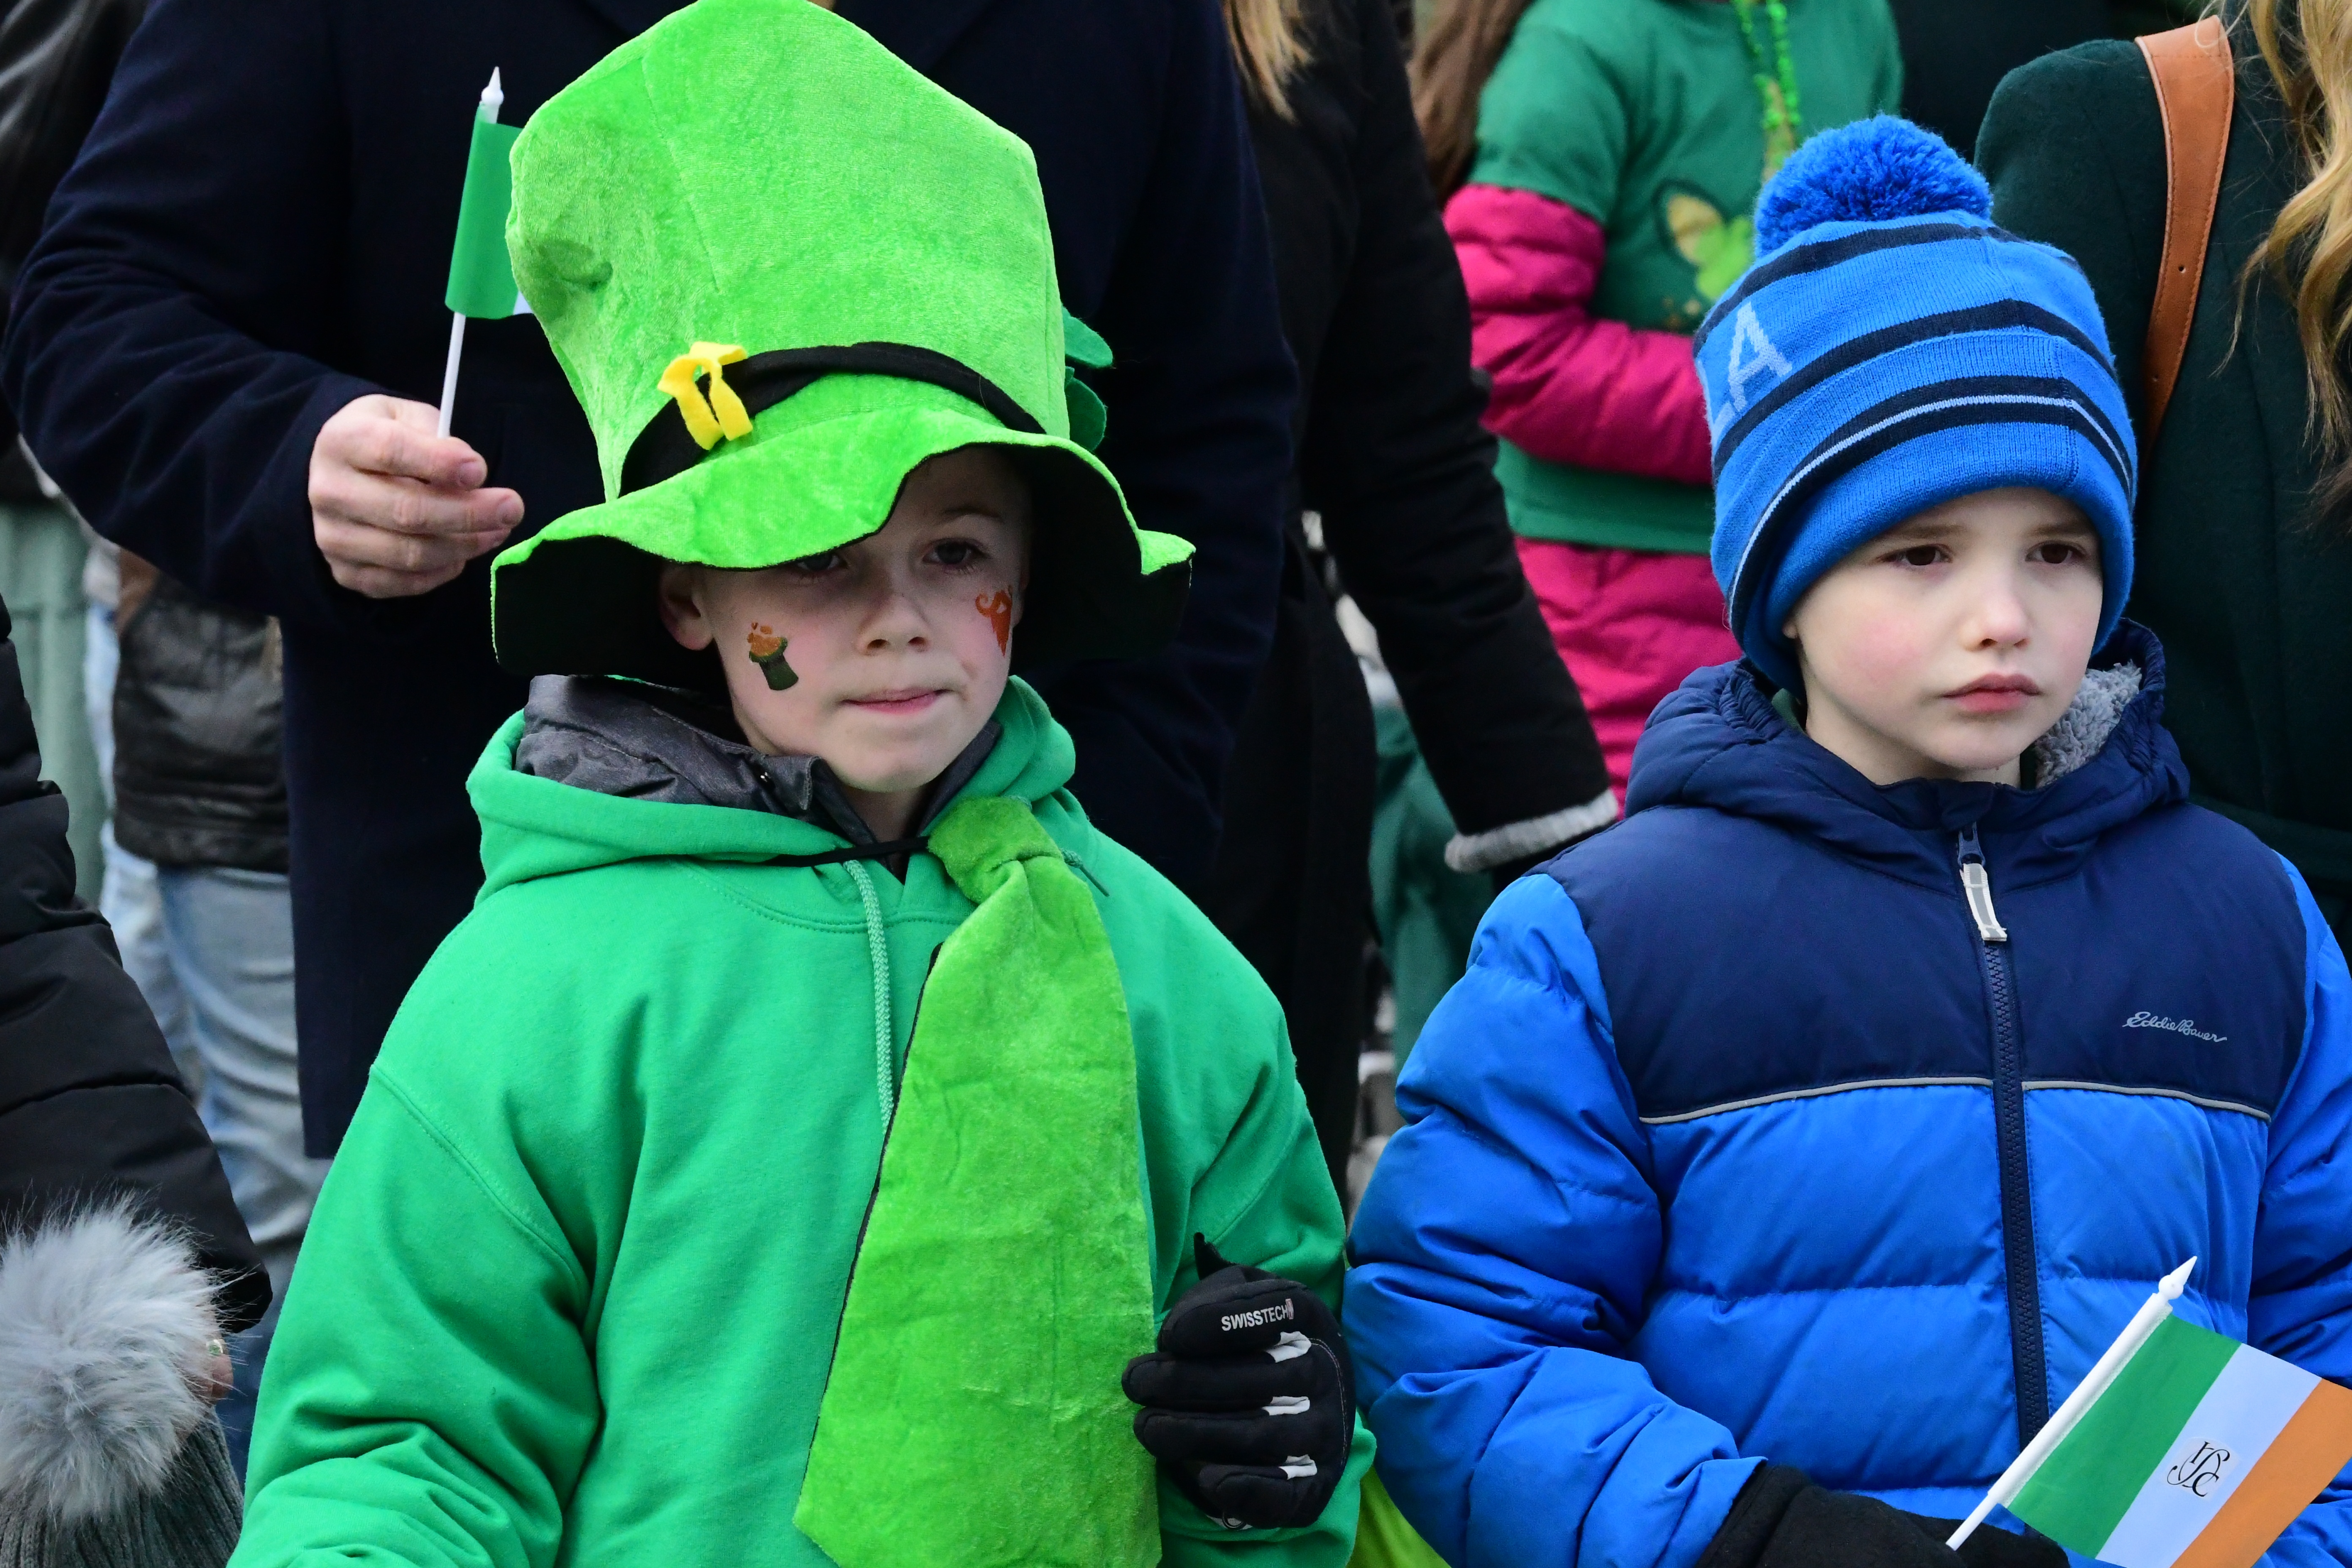 The 2022 St Patrick's Day Parade hosted by the Friendly Sons of St Patrick Hunterdon County took place in Clinton on March 13.



